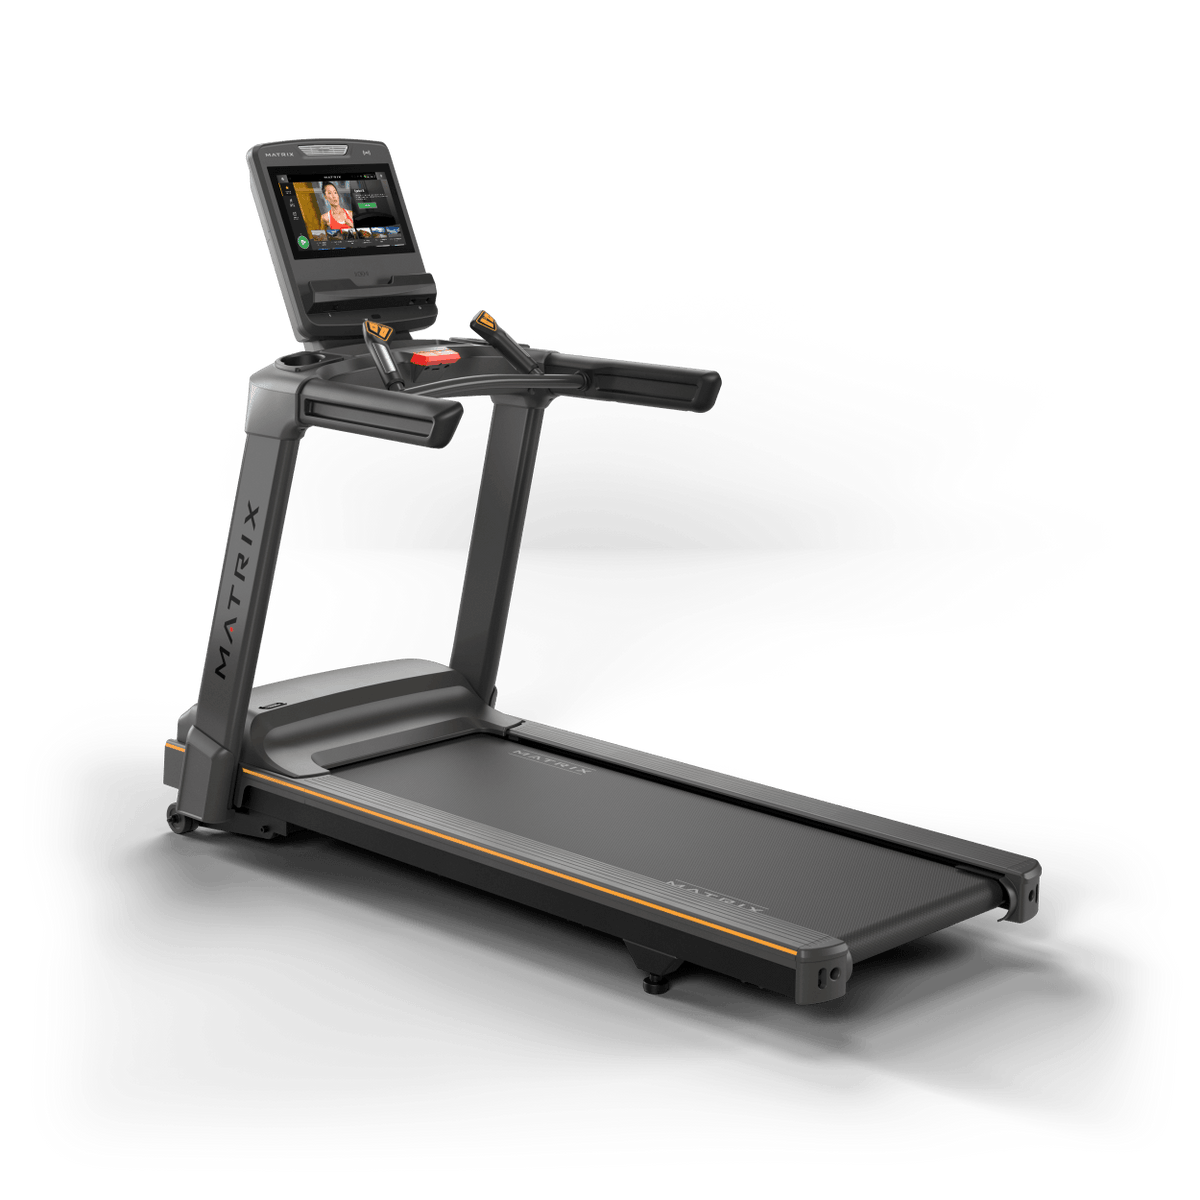 Matrix Fitness Lifestyle Treadmill with Touch Console front view | Fitness Experience